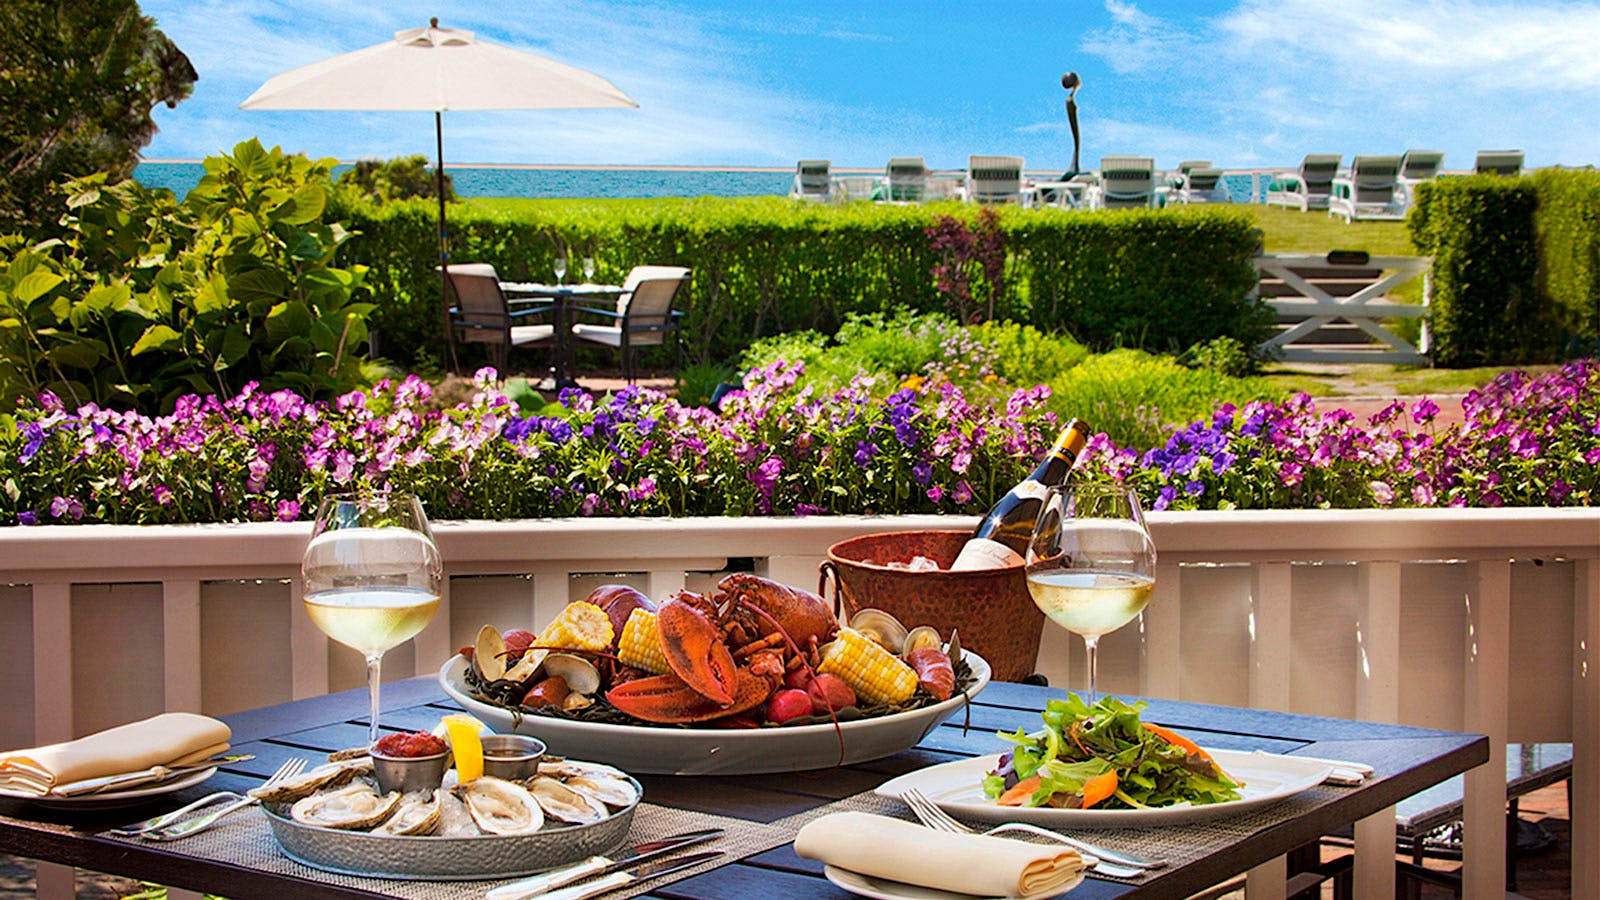 A platter of lobster, clams and corn beside a plate of salad, a platter of oysters, two glasses of white wine and a bottle of white wine in an ice bucket on a set table outside at Topper's at the Wauwinet